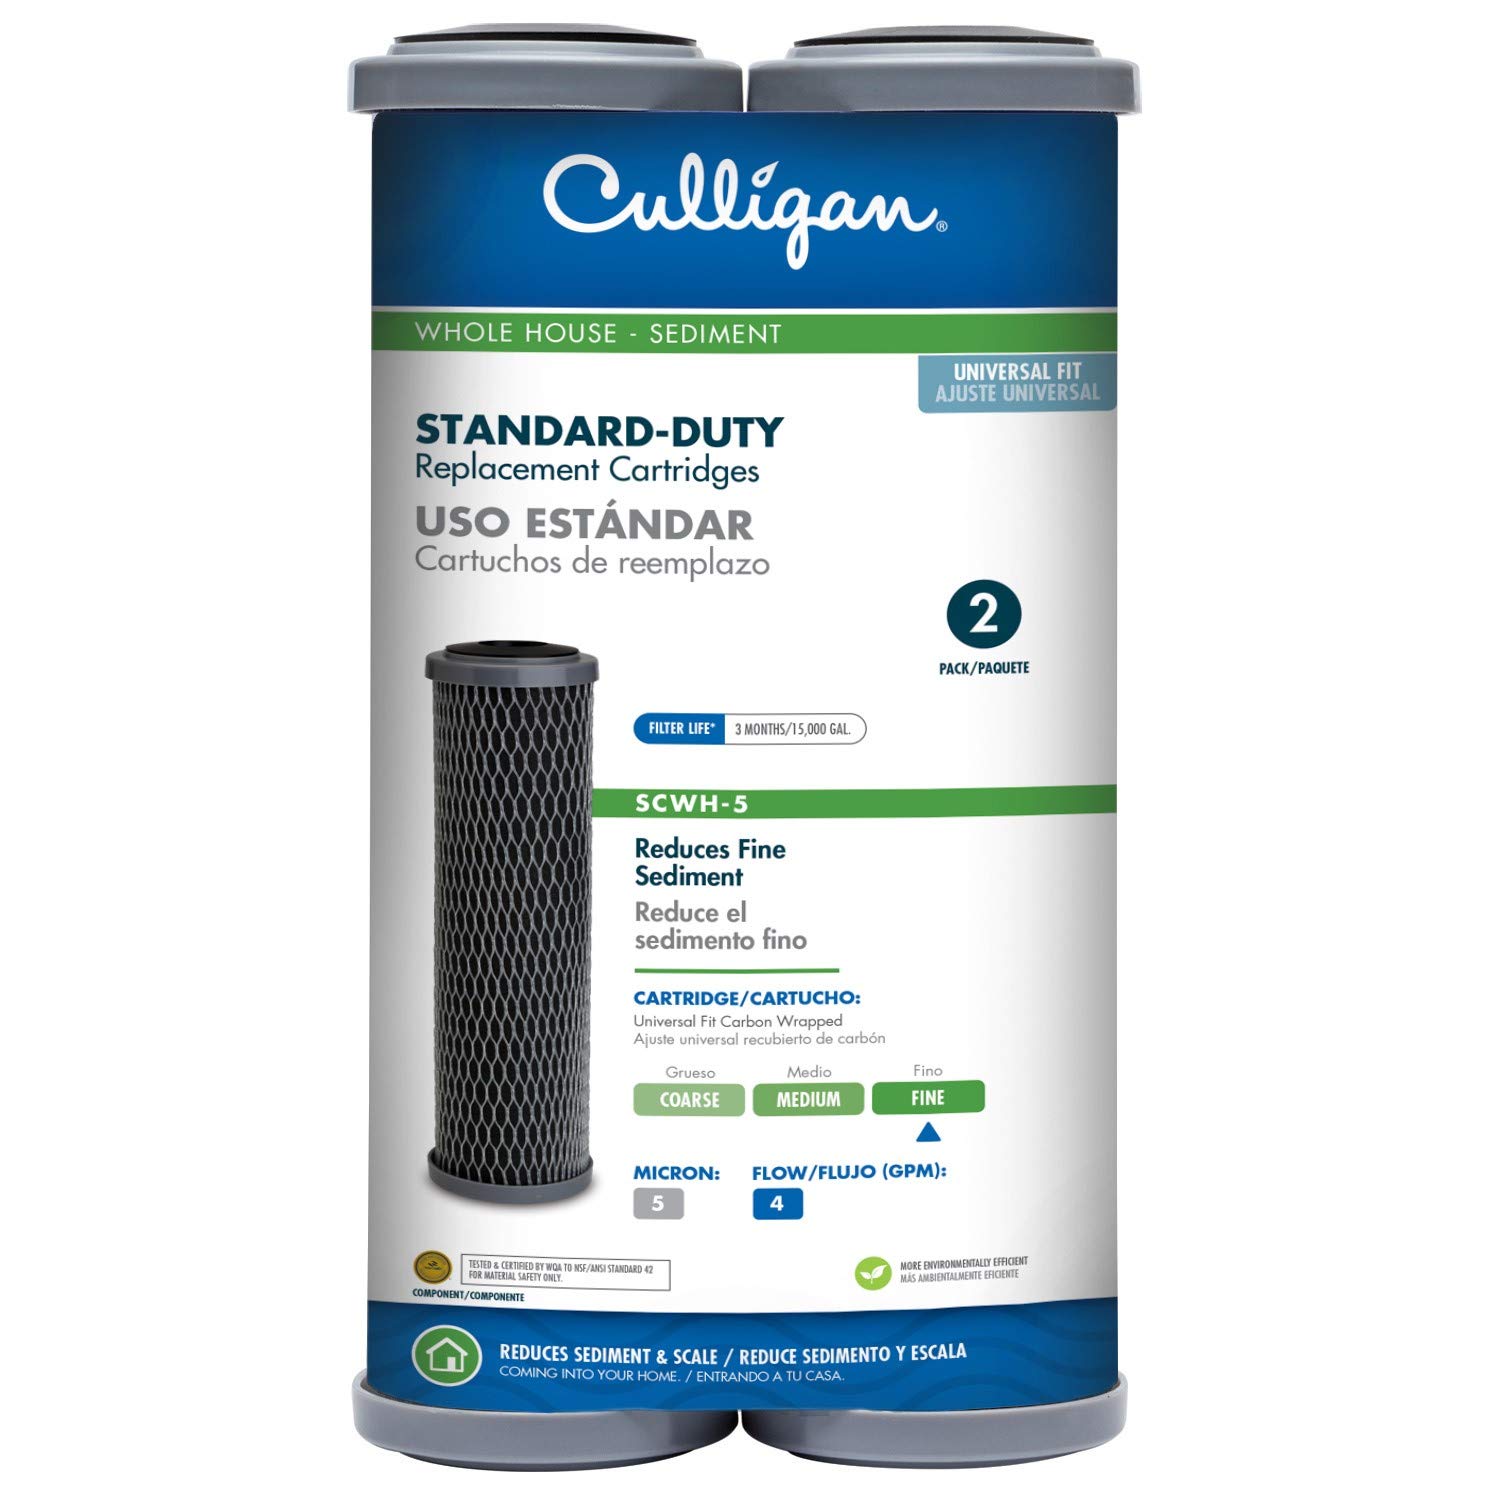 Culligan SCWH-5 Standard-Duty Whole House Water Filter Replacement Cartridges, 2-Pack, Black